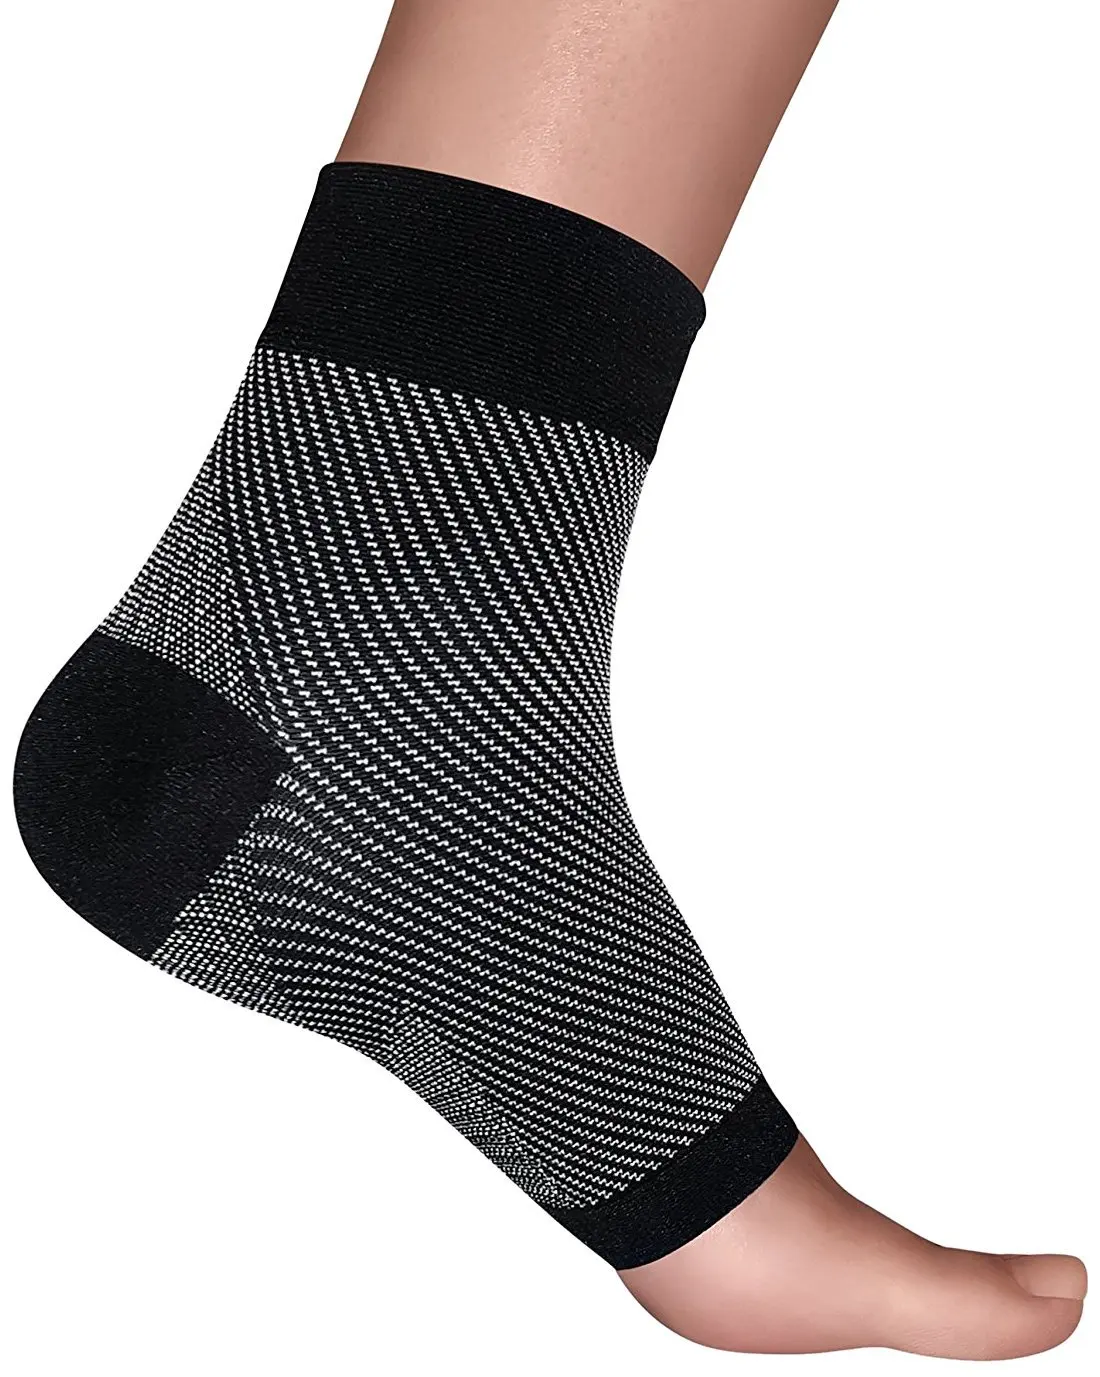 best compression socks for foot pain